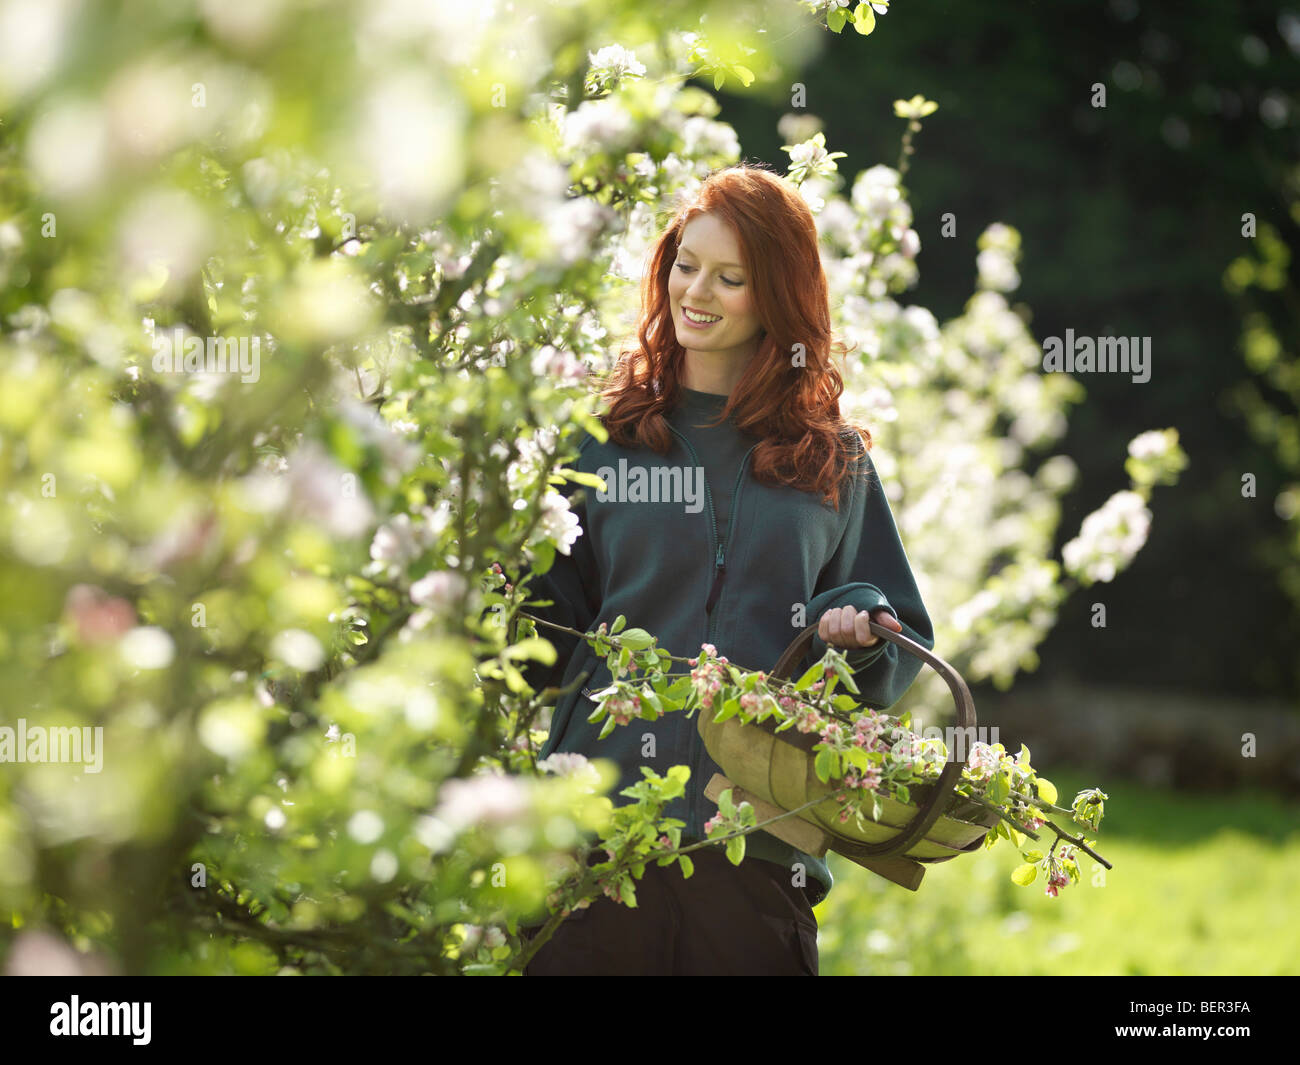 Woman Cutting Apple Blossom In Orchard Stock Photo